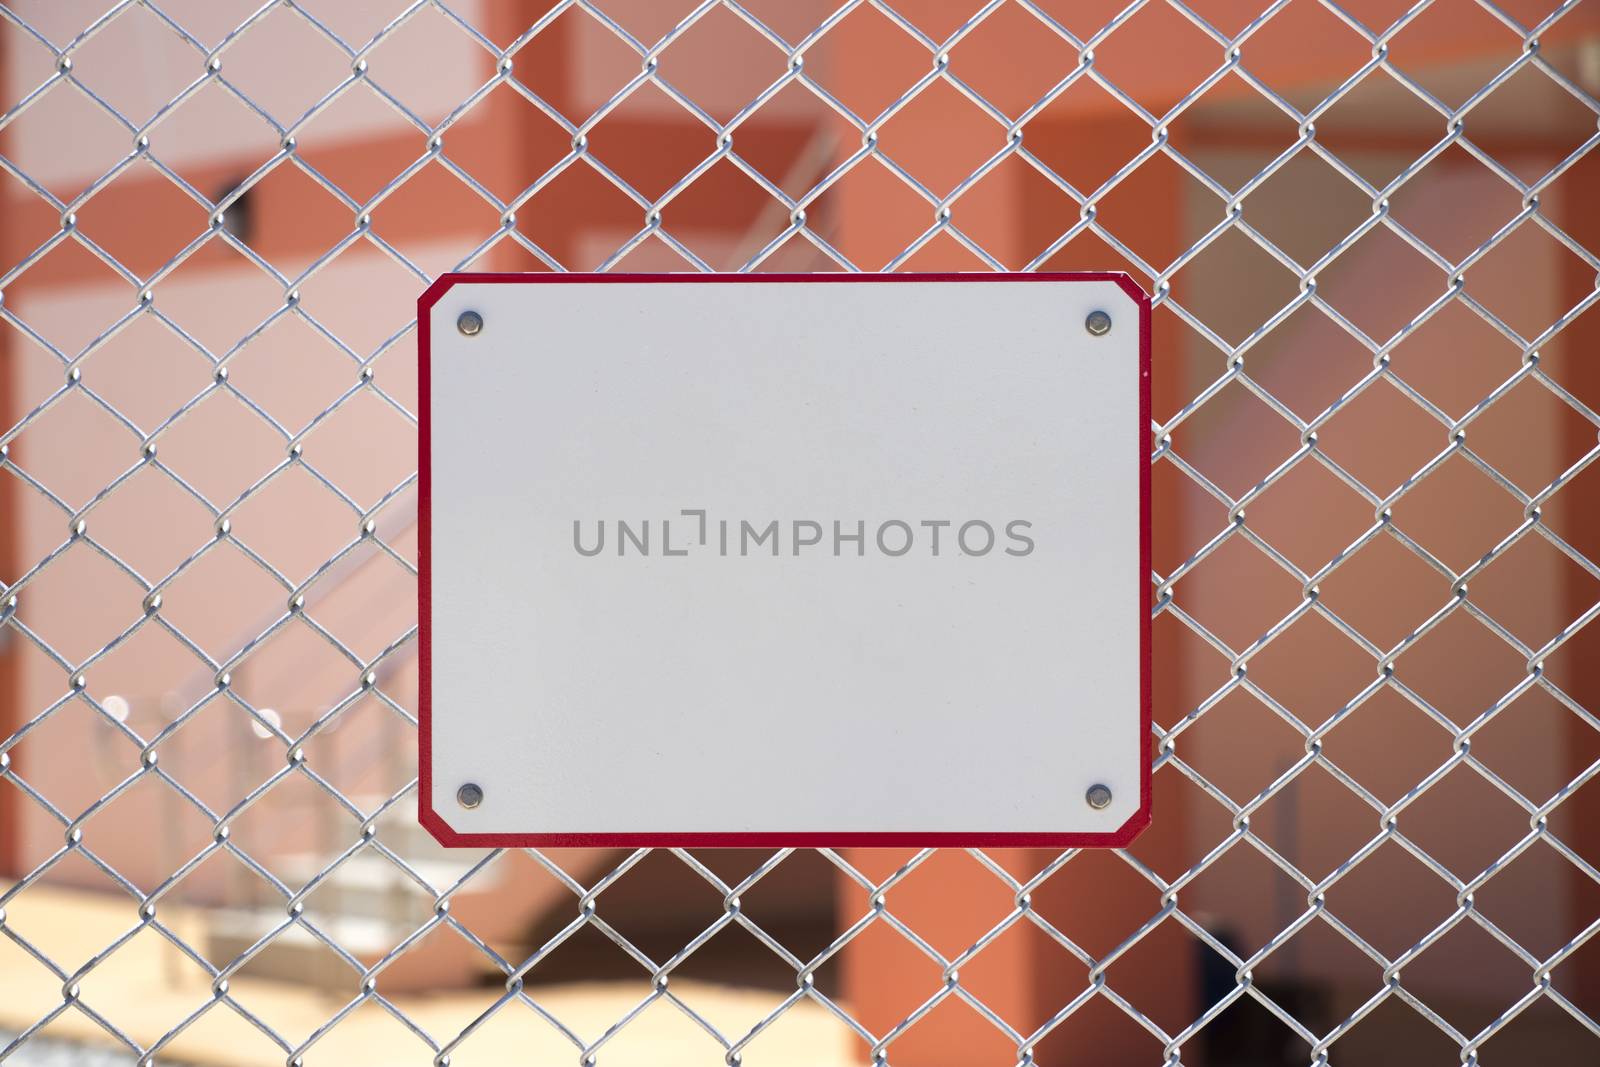 The white metal sign is installed on the metal mesh fence. by Eungsuwat